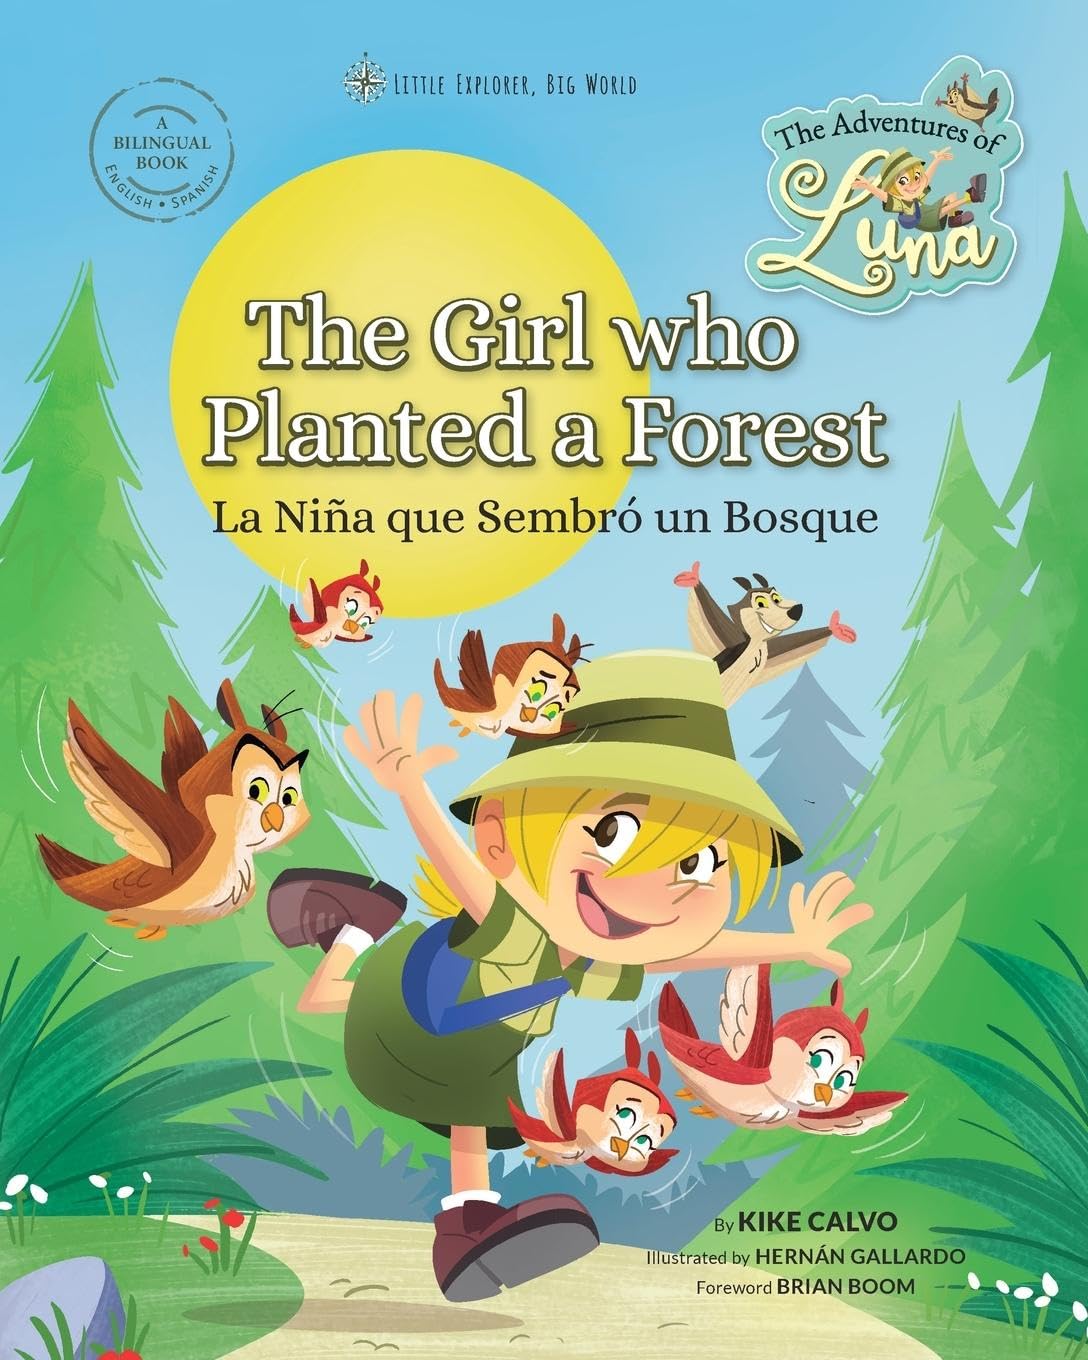 National Geographic Photo Expert and Author Kike Calvo Releases New Bilingual English-Spanish Children’s Book - The Girl Who Planted a Forest